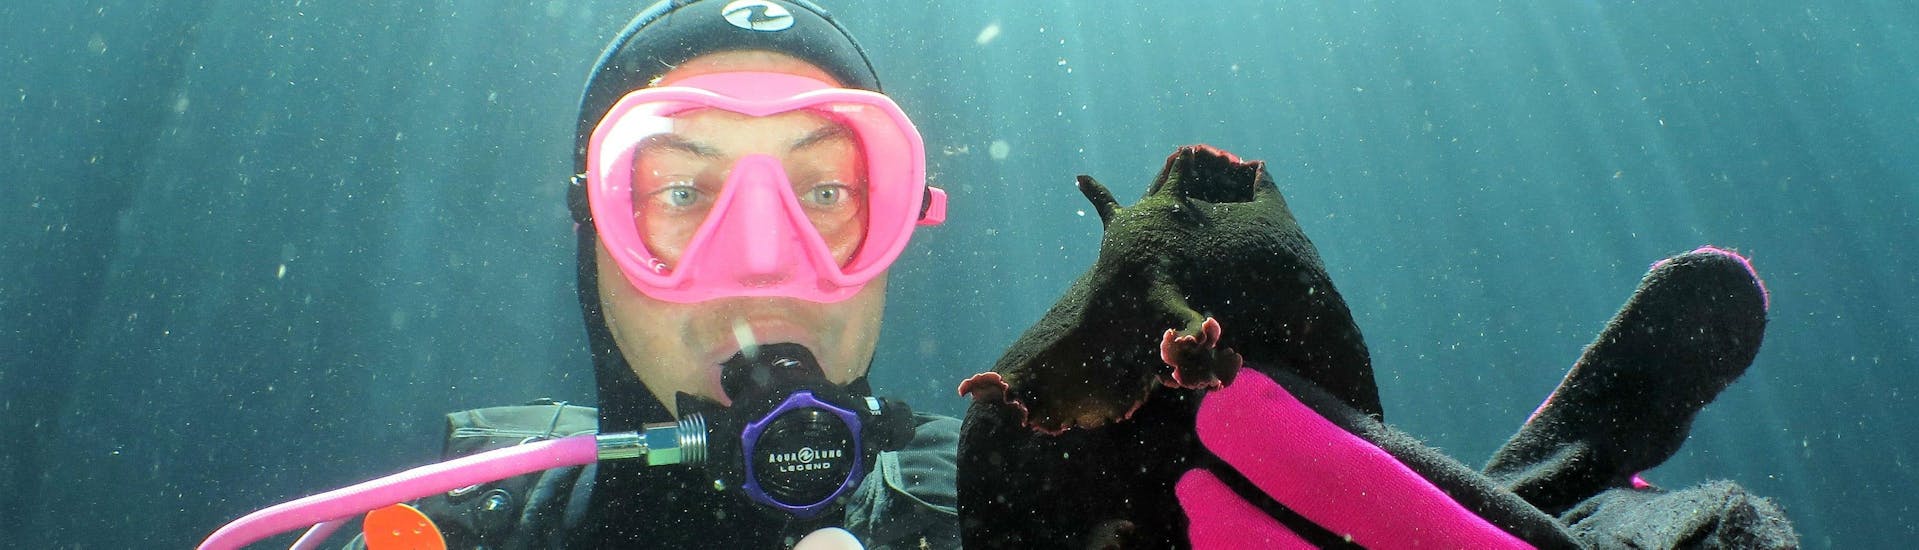 During the Scuba Diving Course for Beginners - SSI Scuba Diver with Octopus Garden, a diver is marvelling at a sea hare which lives in the Mediterranean around Malta.